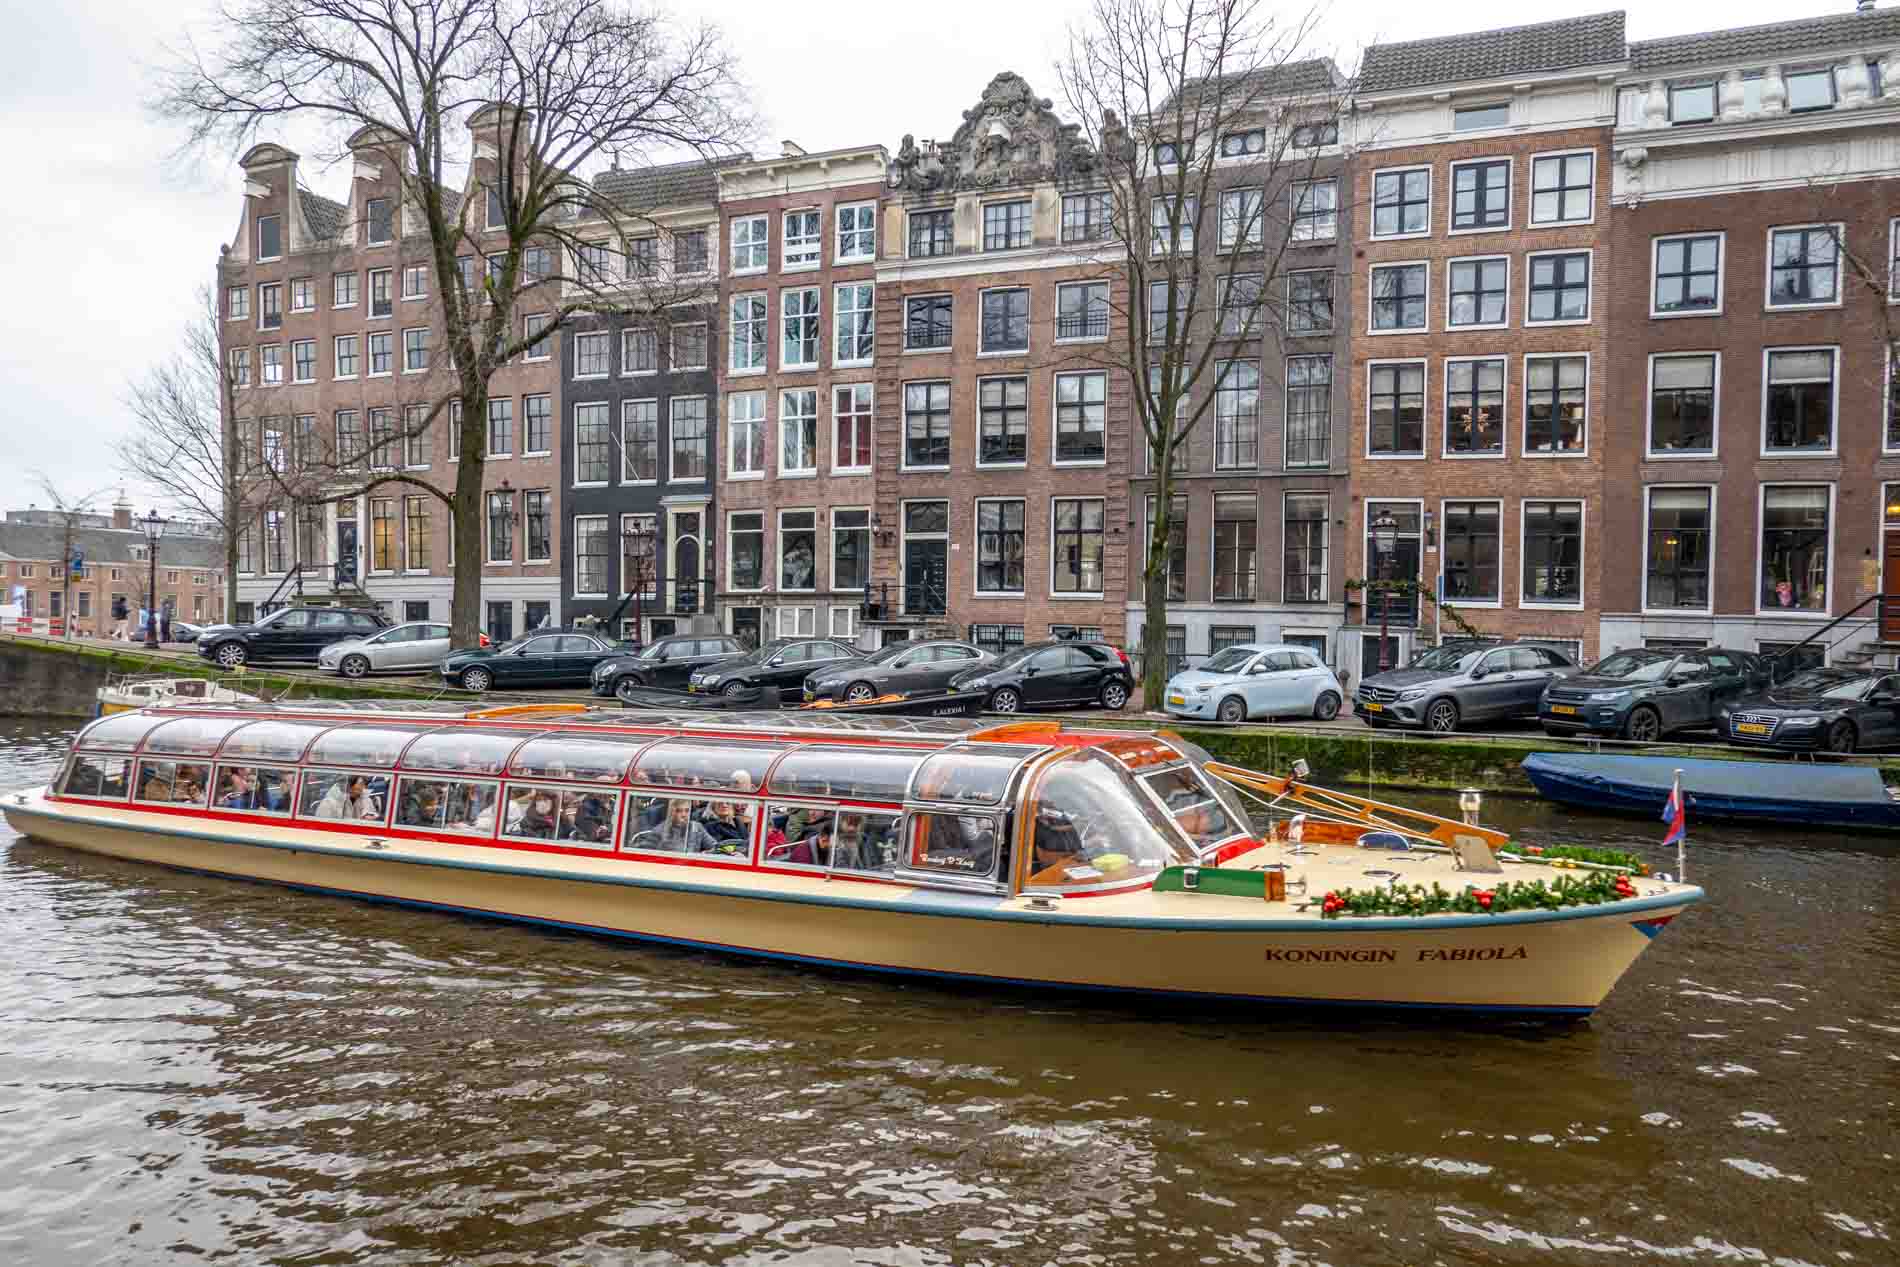 Canal cruise boat on the water.